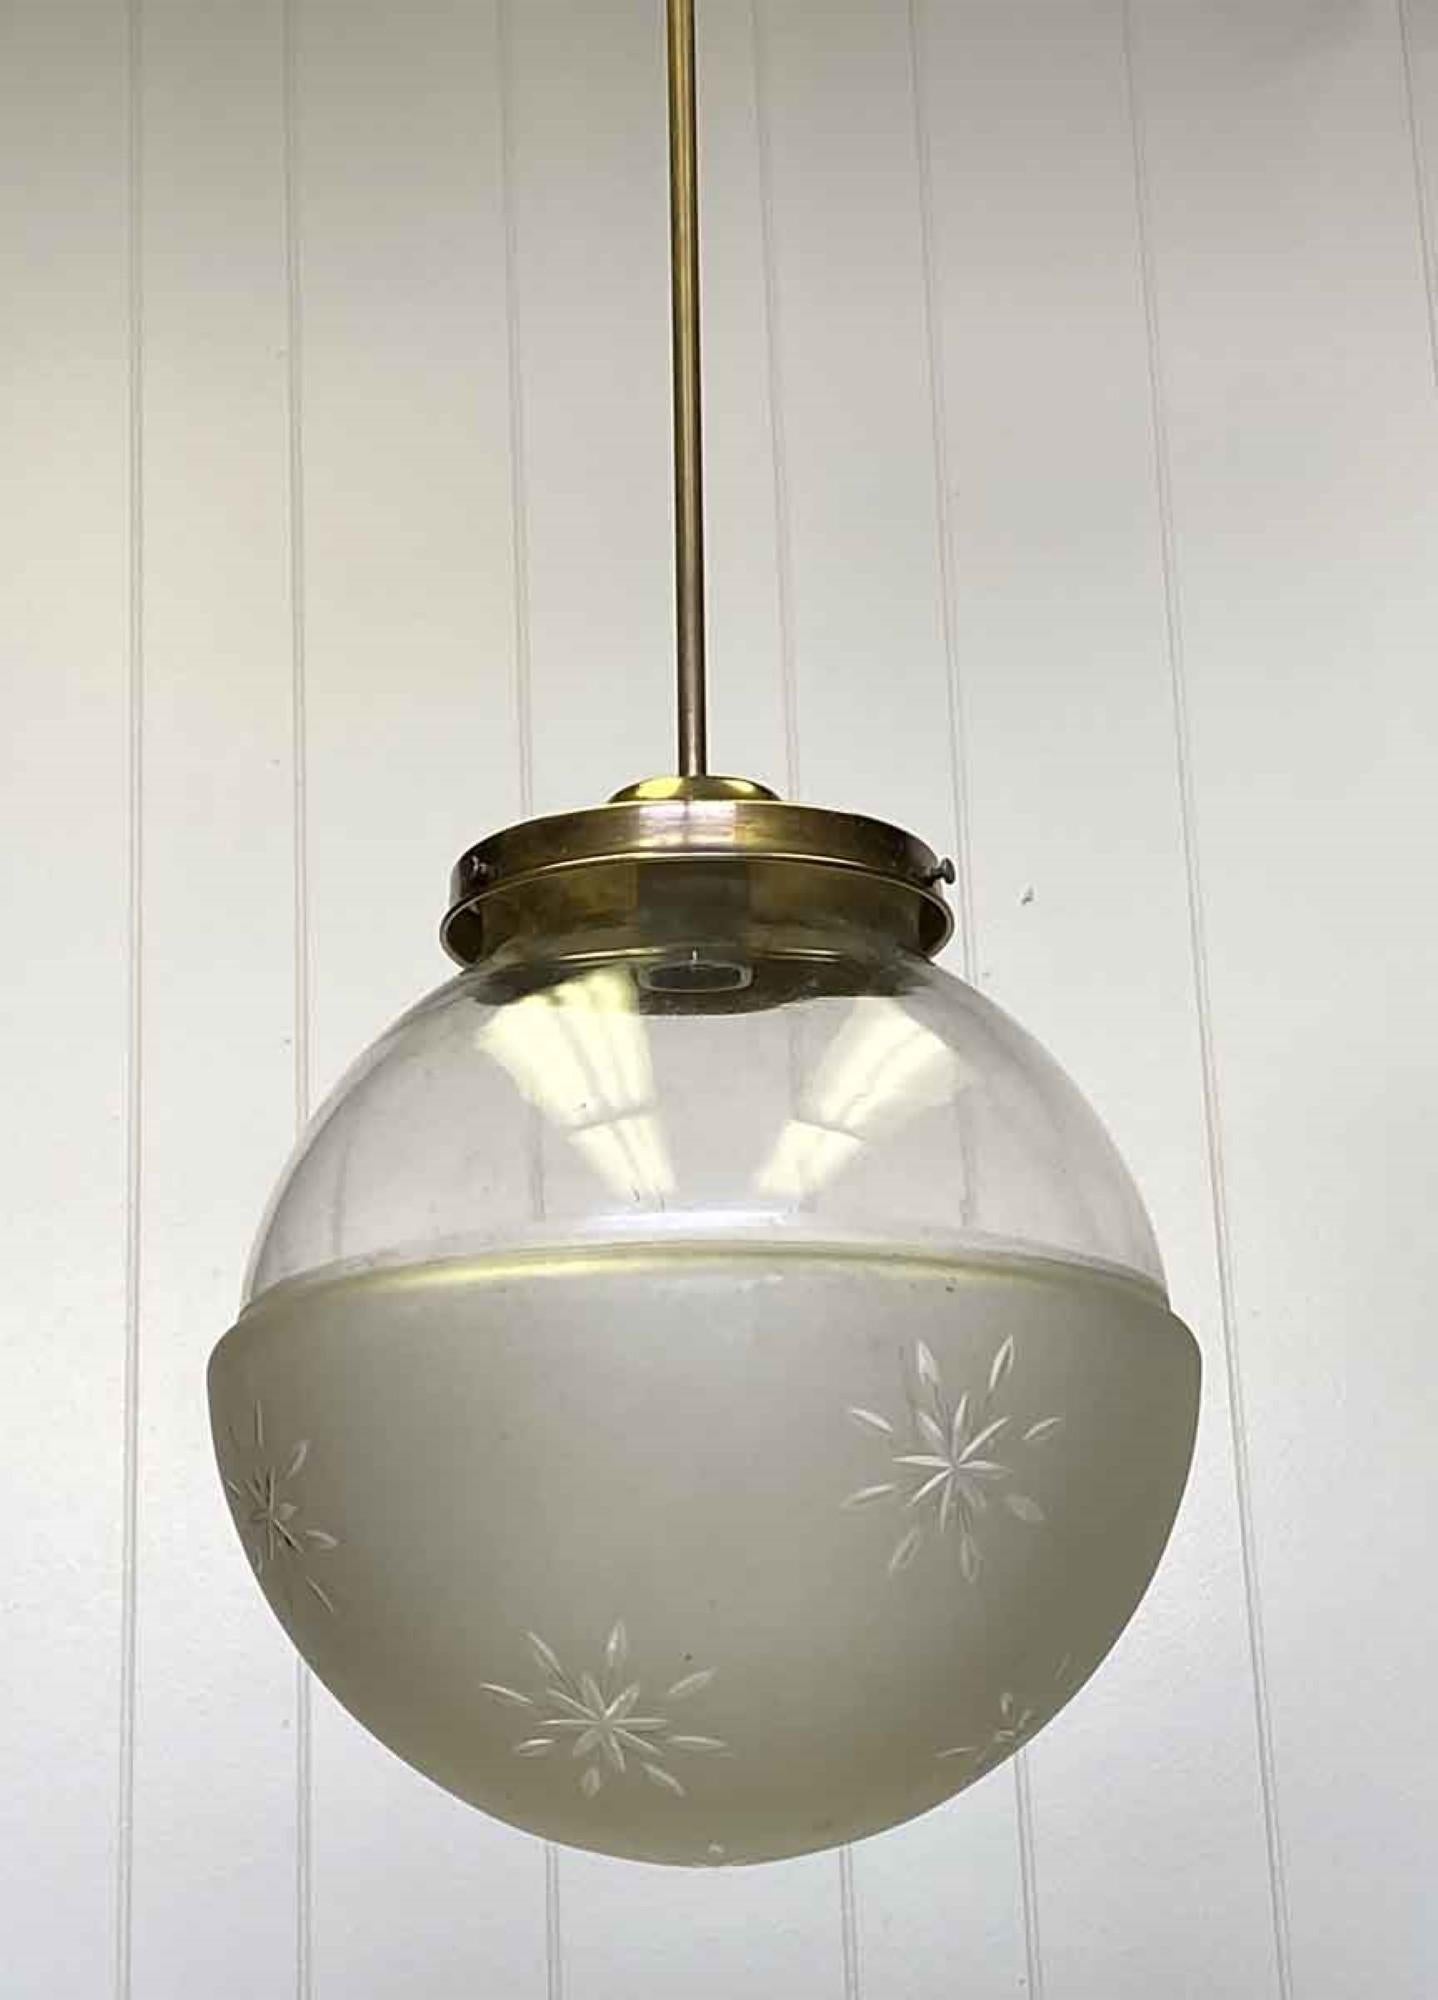 1920s etched glass globe fitted with a slender new brass pole fixture. Please note, this item is located in our Scranton, PA location.